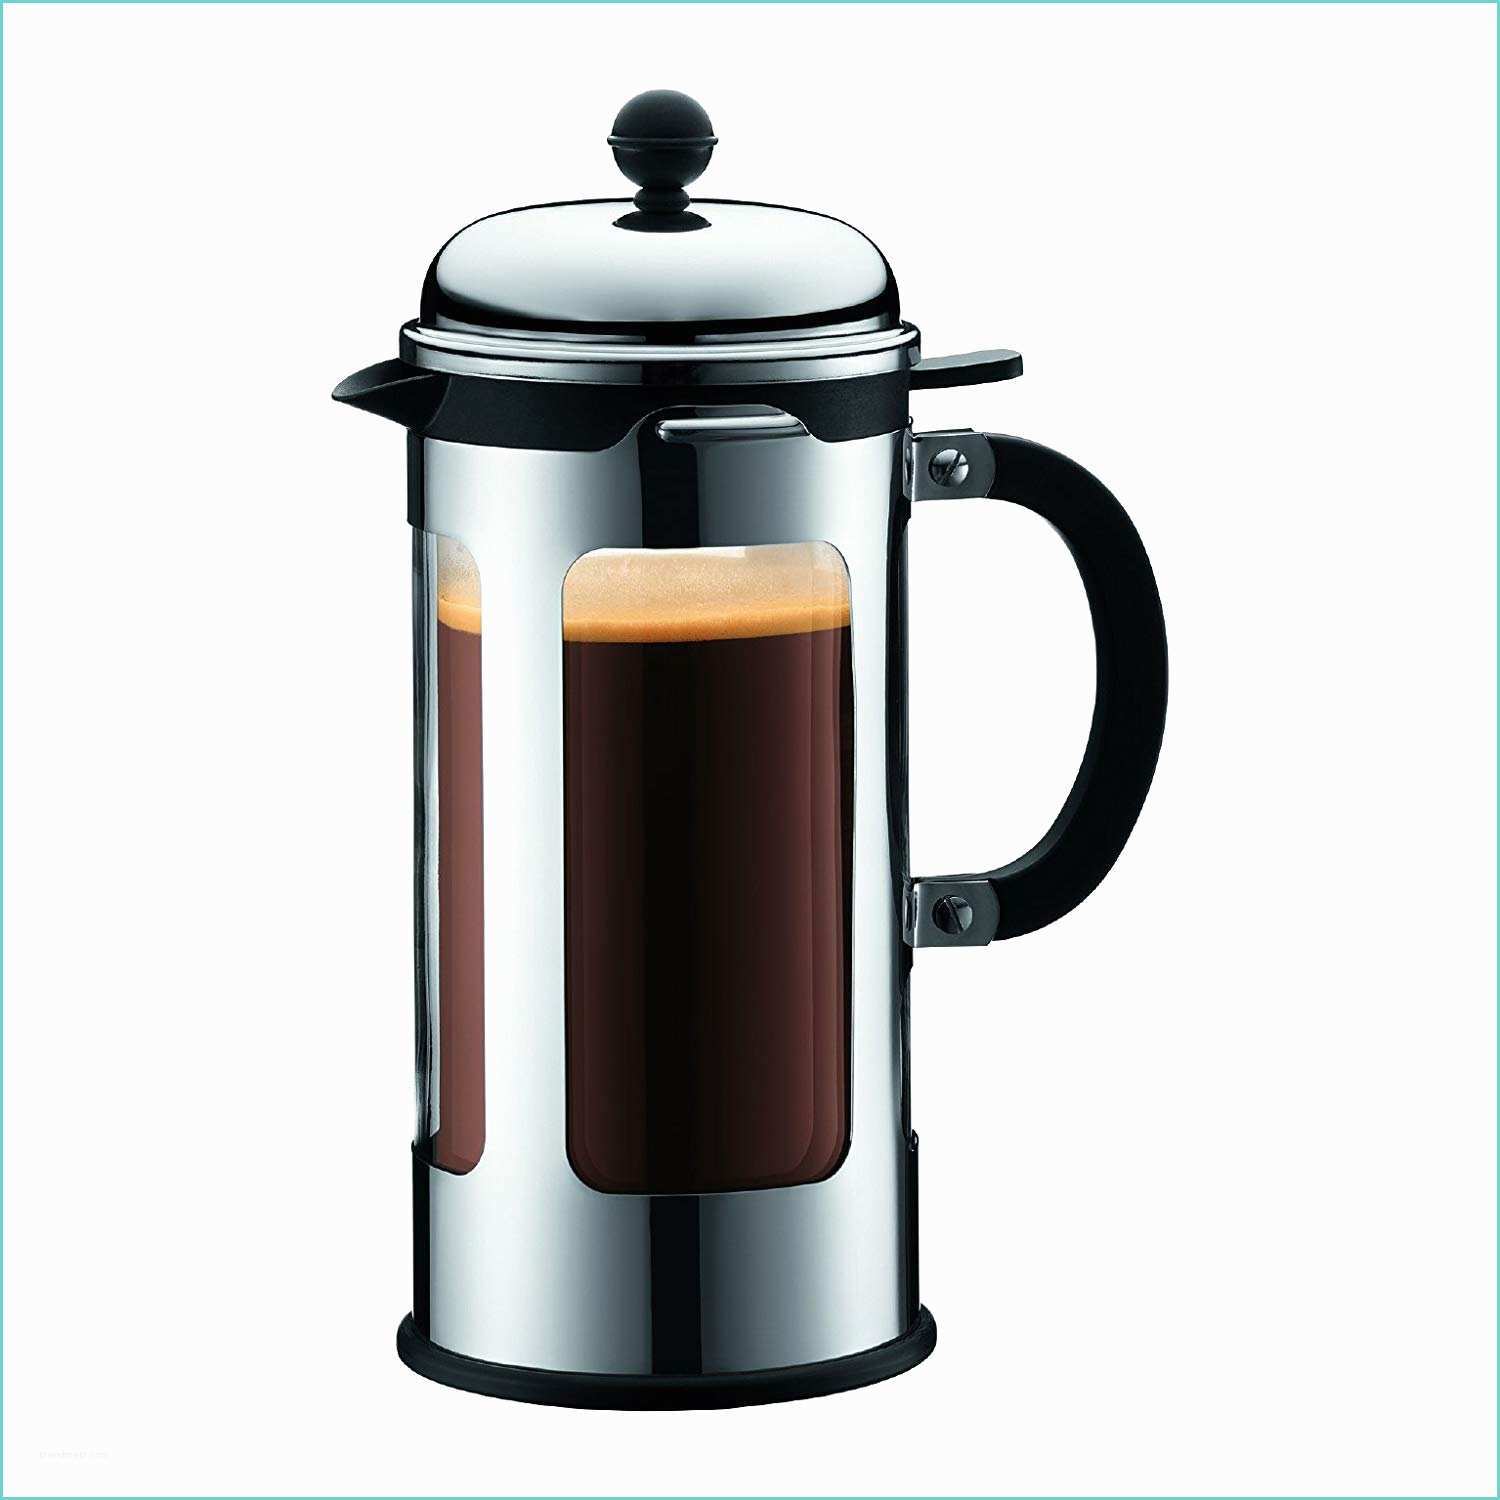 Bodum Tea Press Instructions What are the Best Insulated French Press Coffee Makers